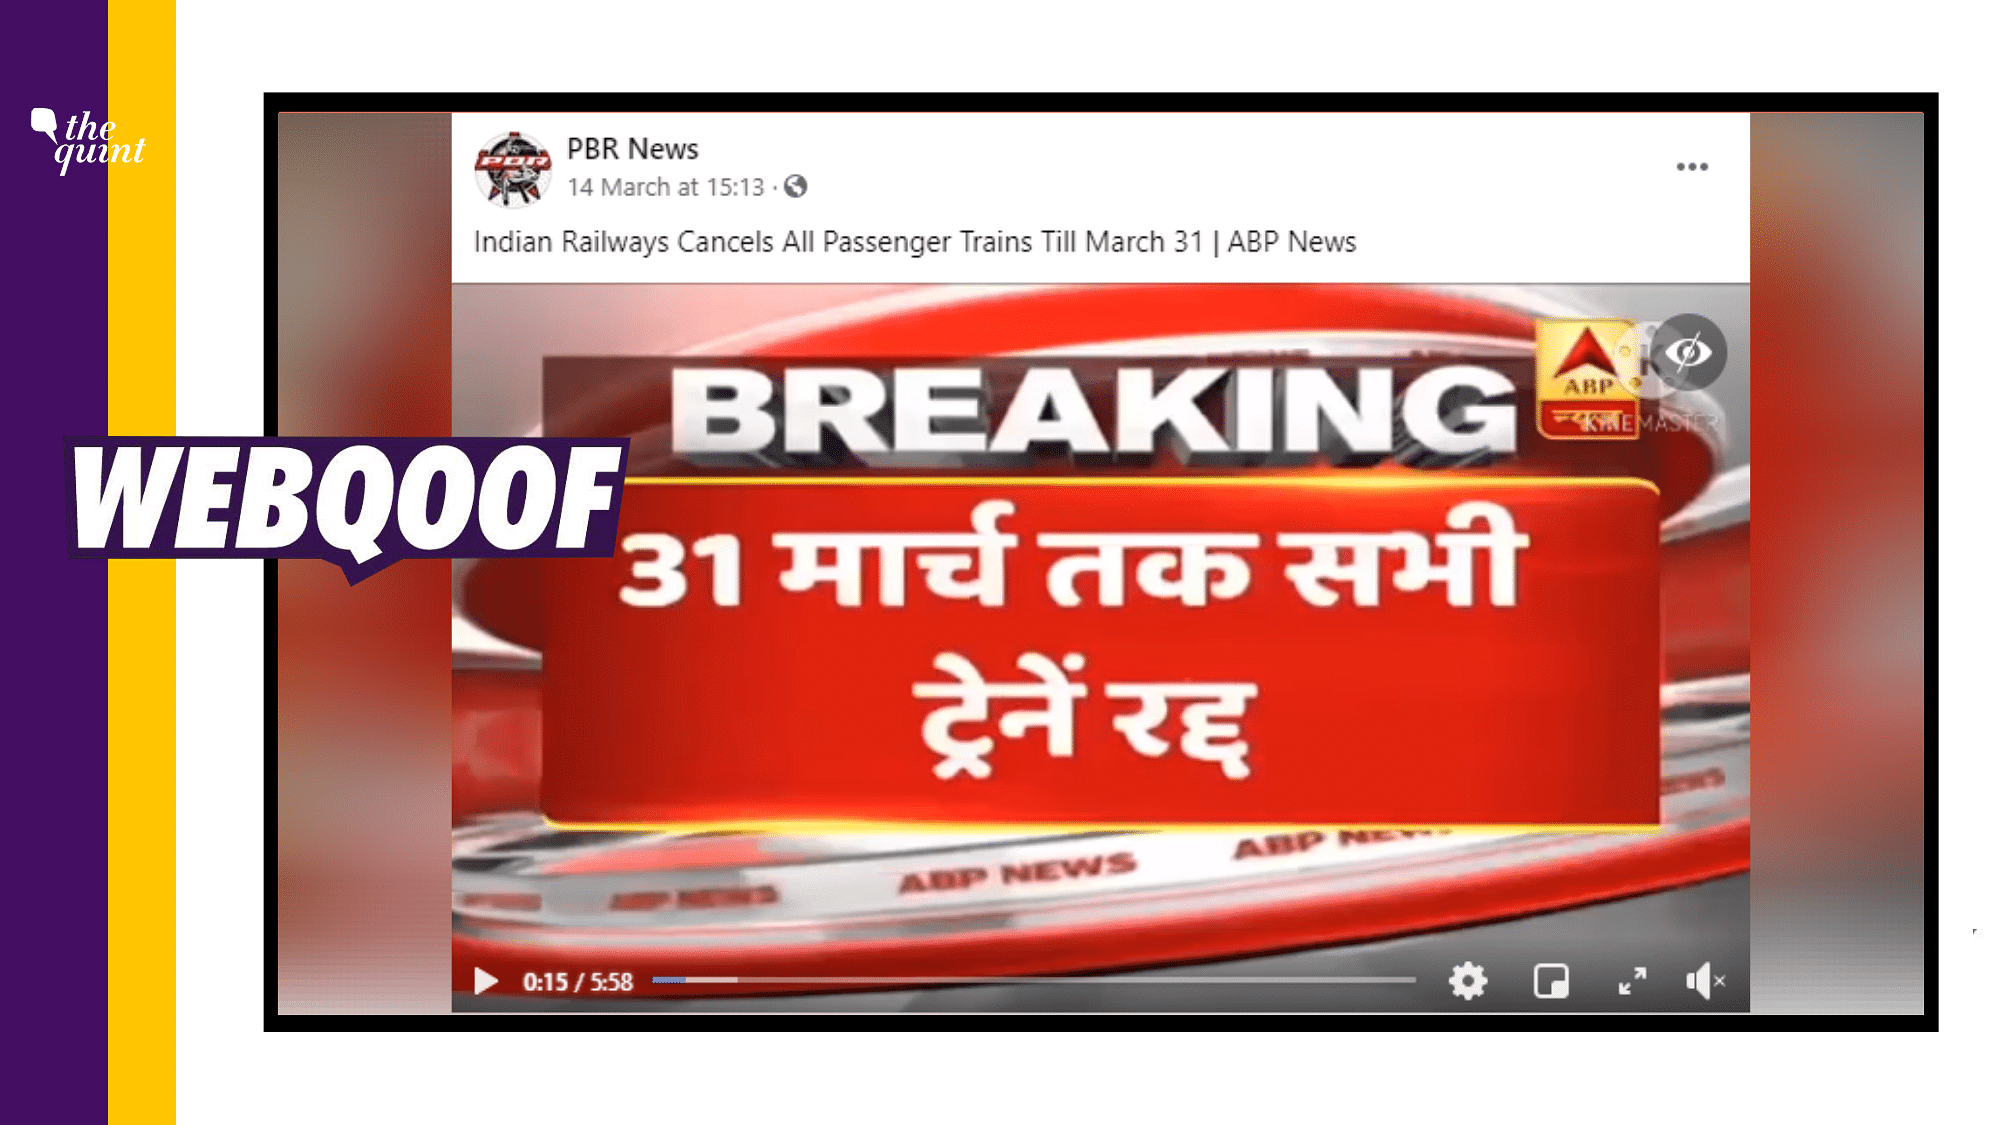 An ABP News Bulletin dated 22 March 2020 has been shared as a recent one.